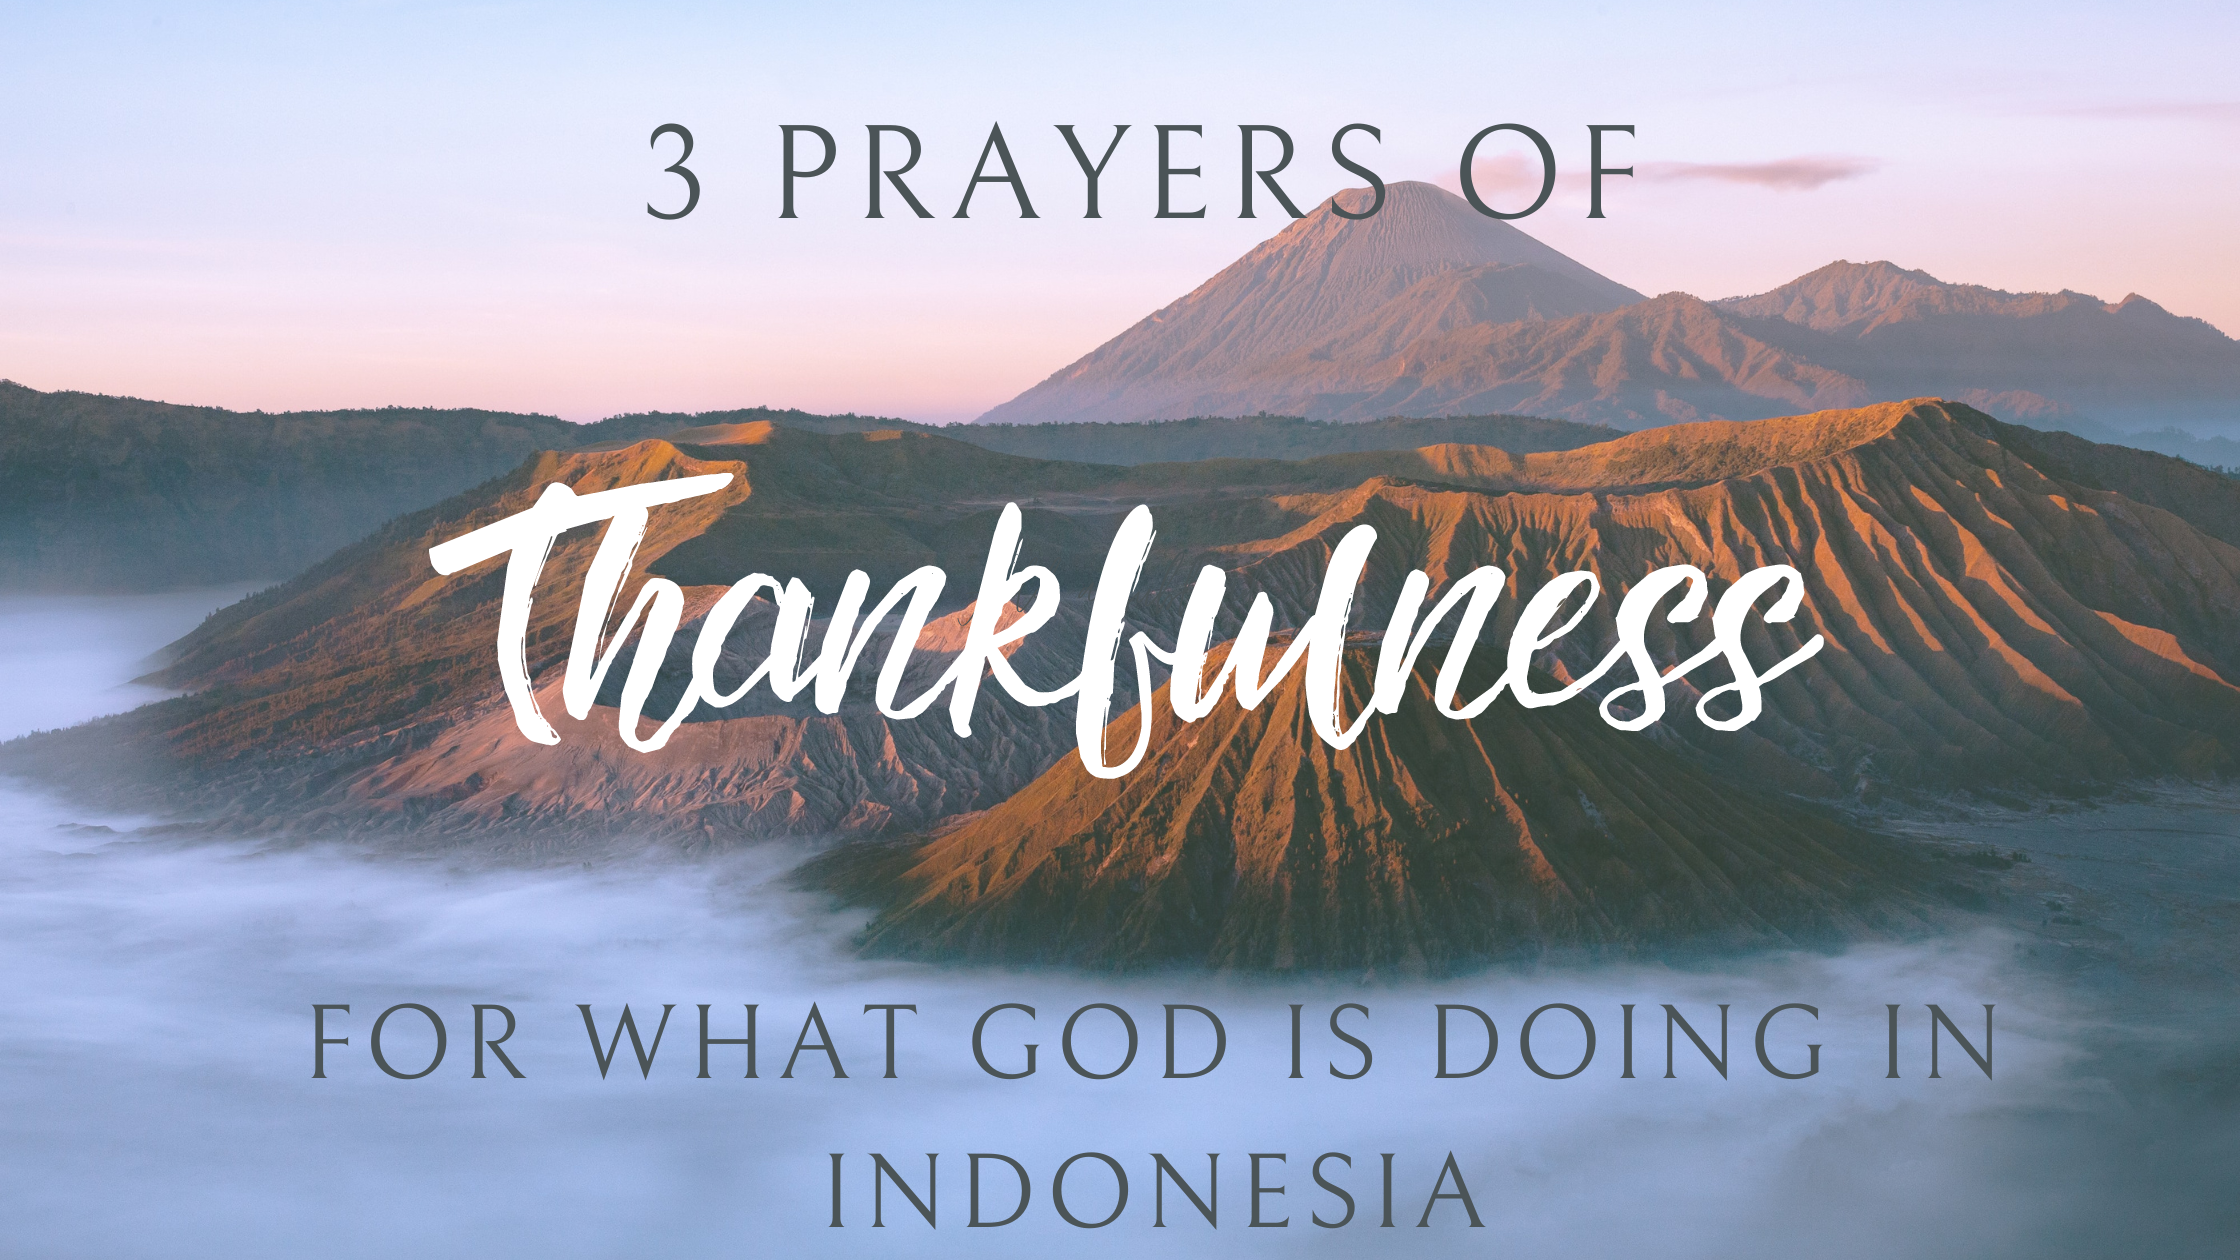 3 Prayers of Thankfulness for What God is Doing in Indonesia